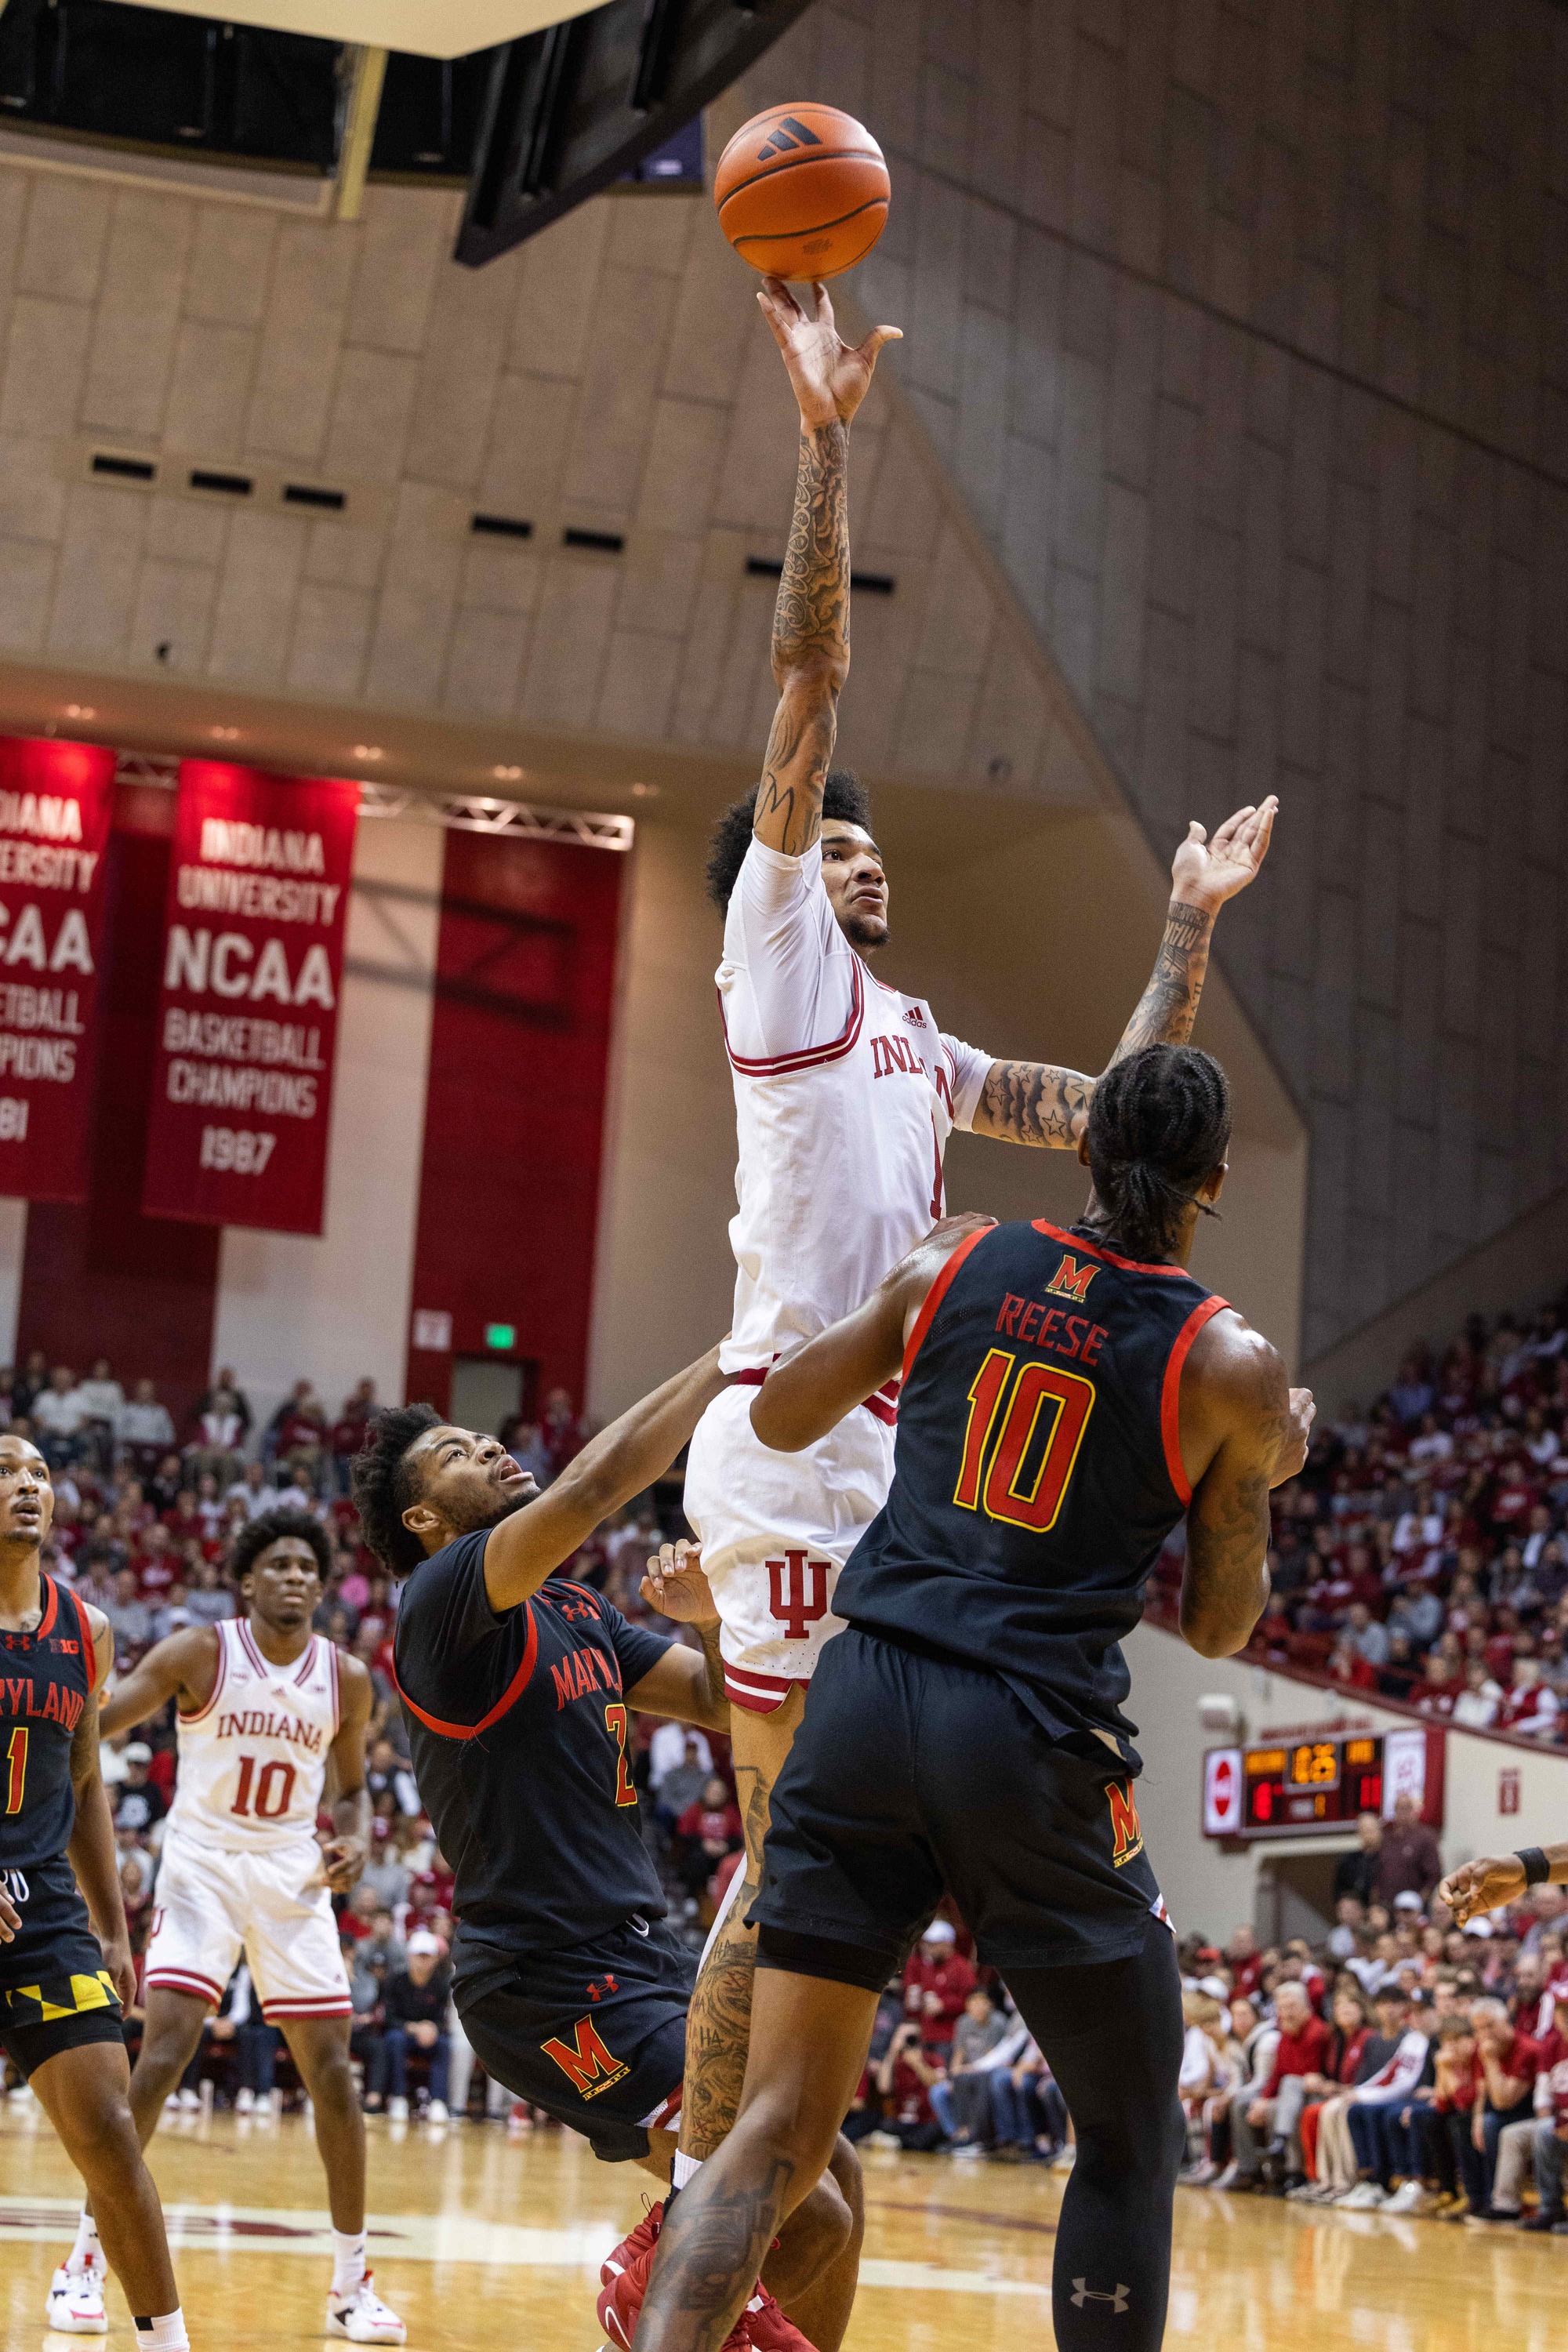  Indiana Hoosiers center Kel'el Ware (1) shoots the ball while Maryland Terrapins forward Julian Reese (10) defends in the first half at Simon Skjodt Assembly Hall.